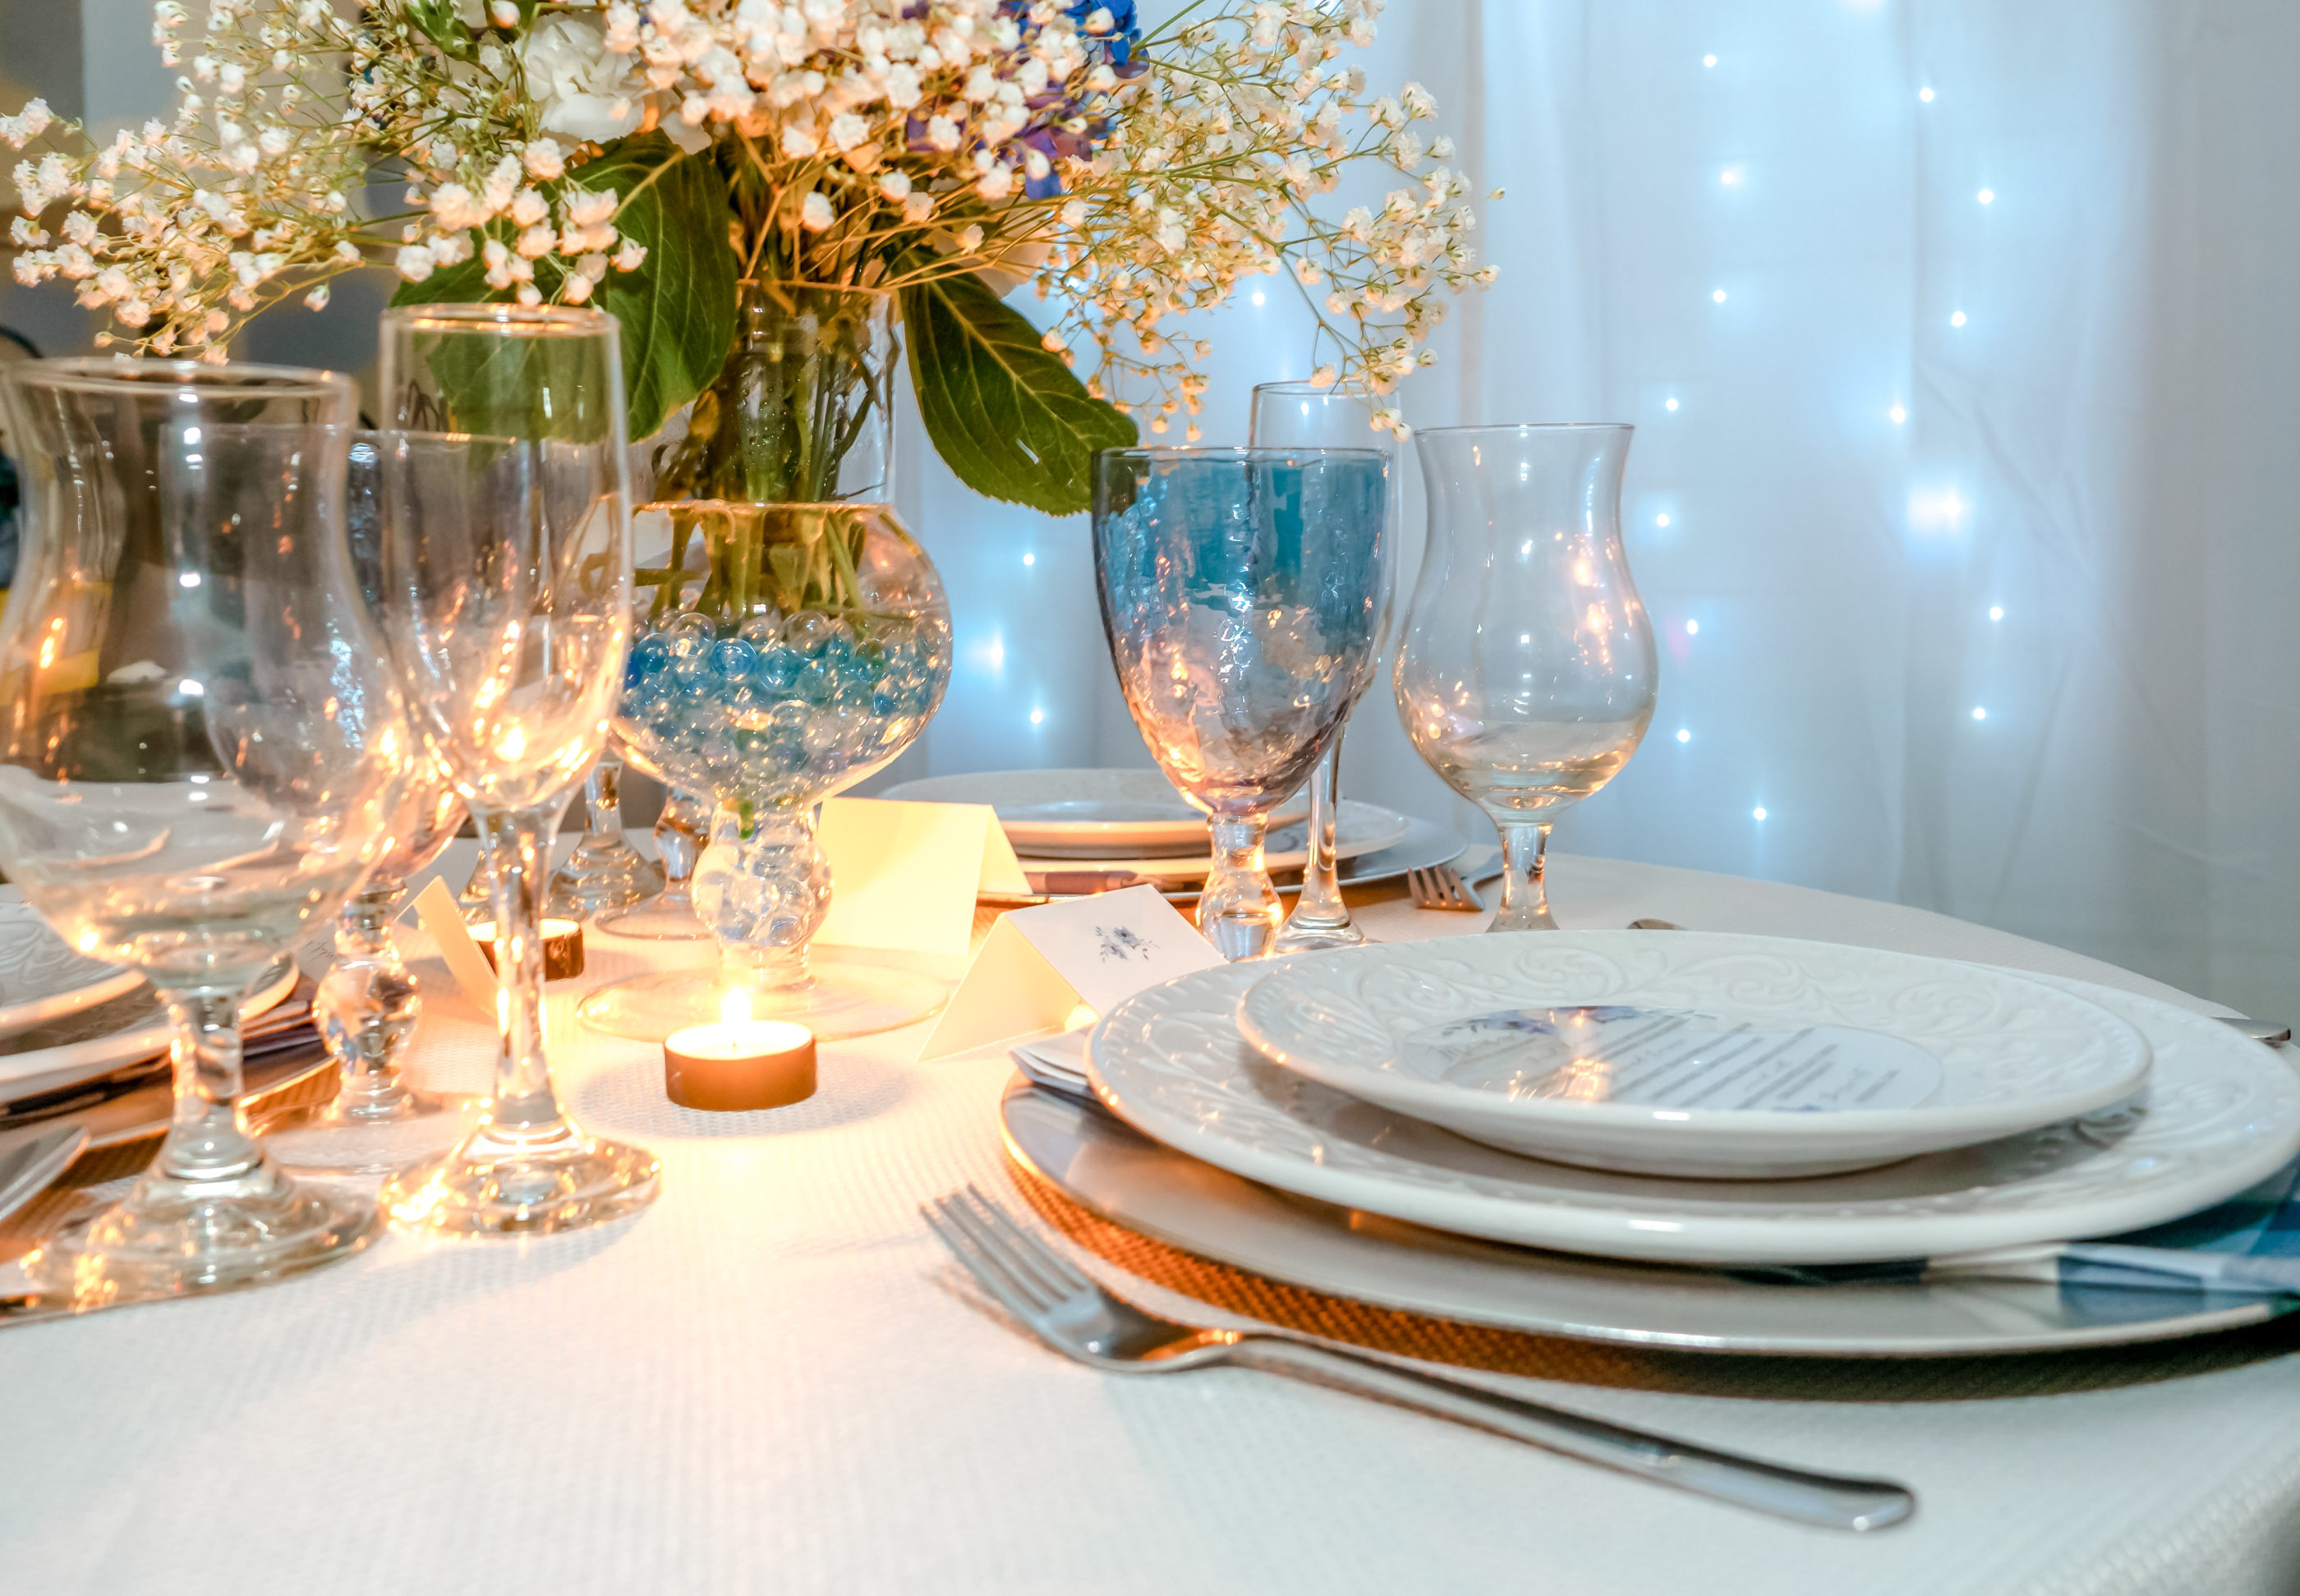 close photograph of reception table with place setting, candles, stemware, and floral centerpiece